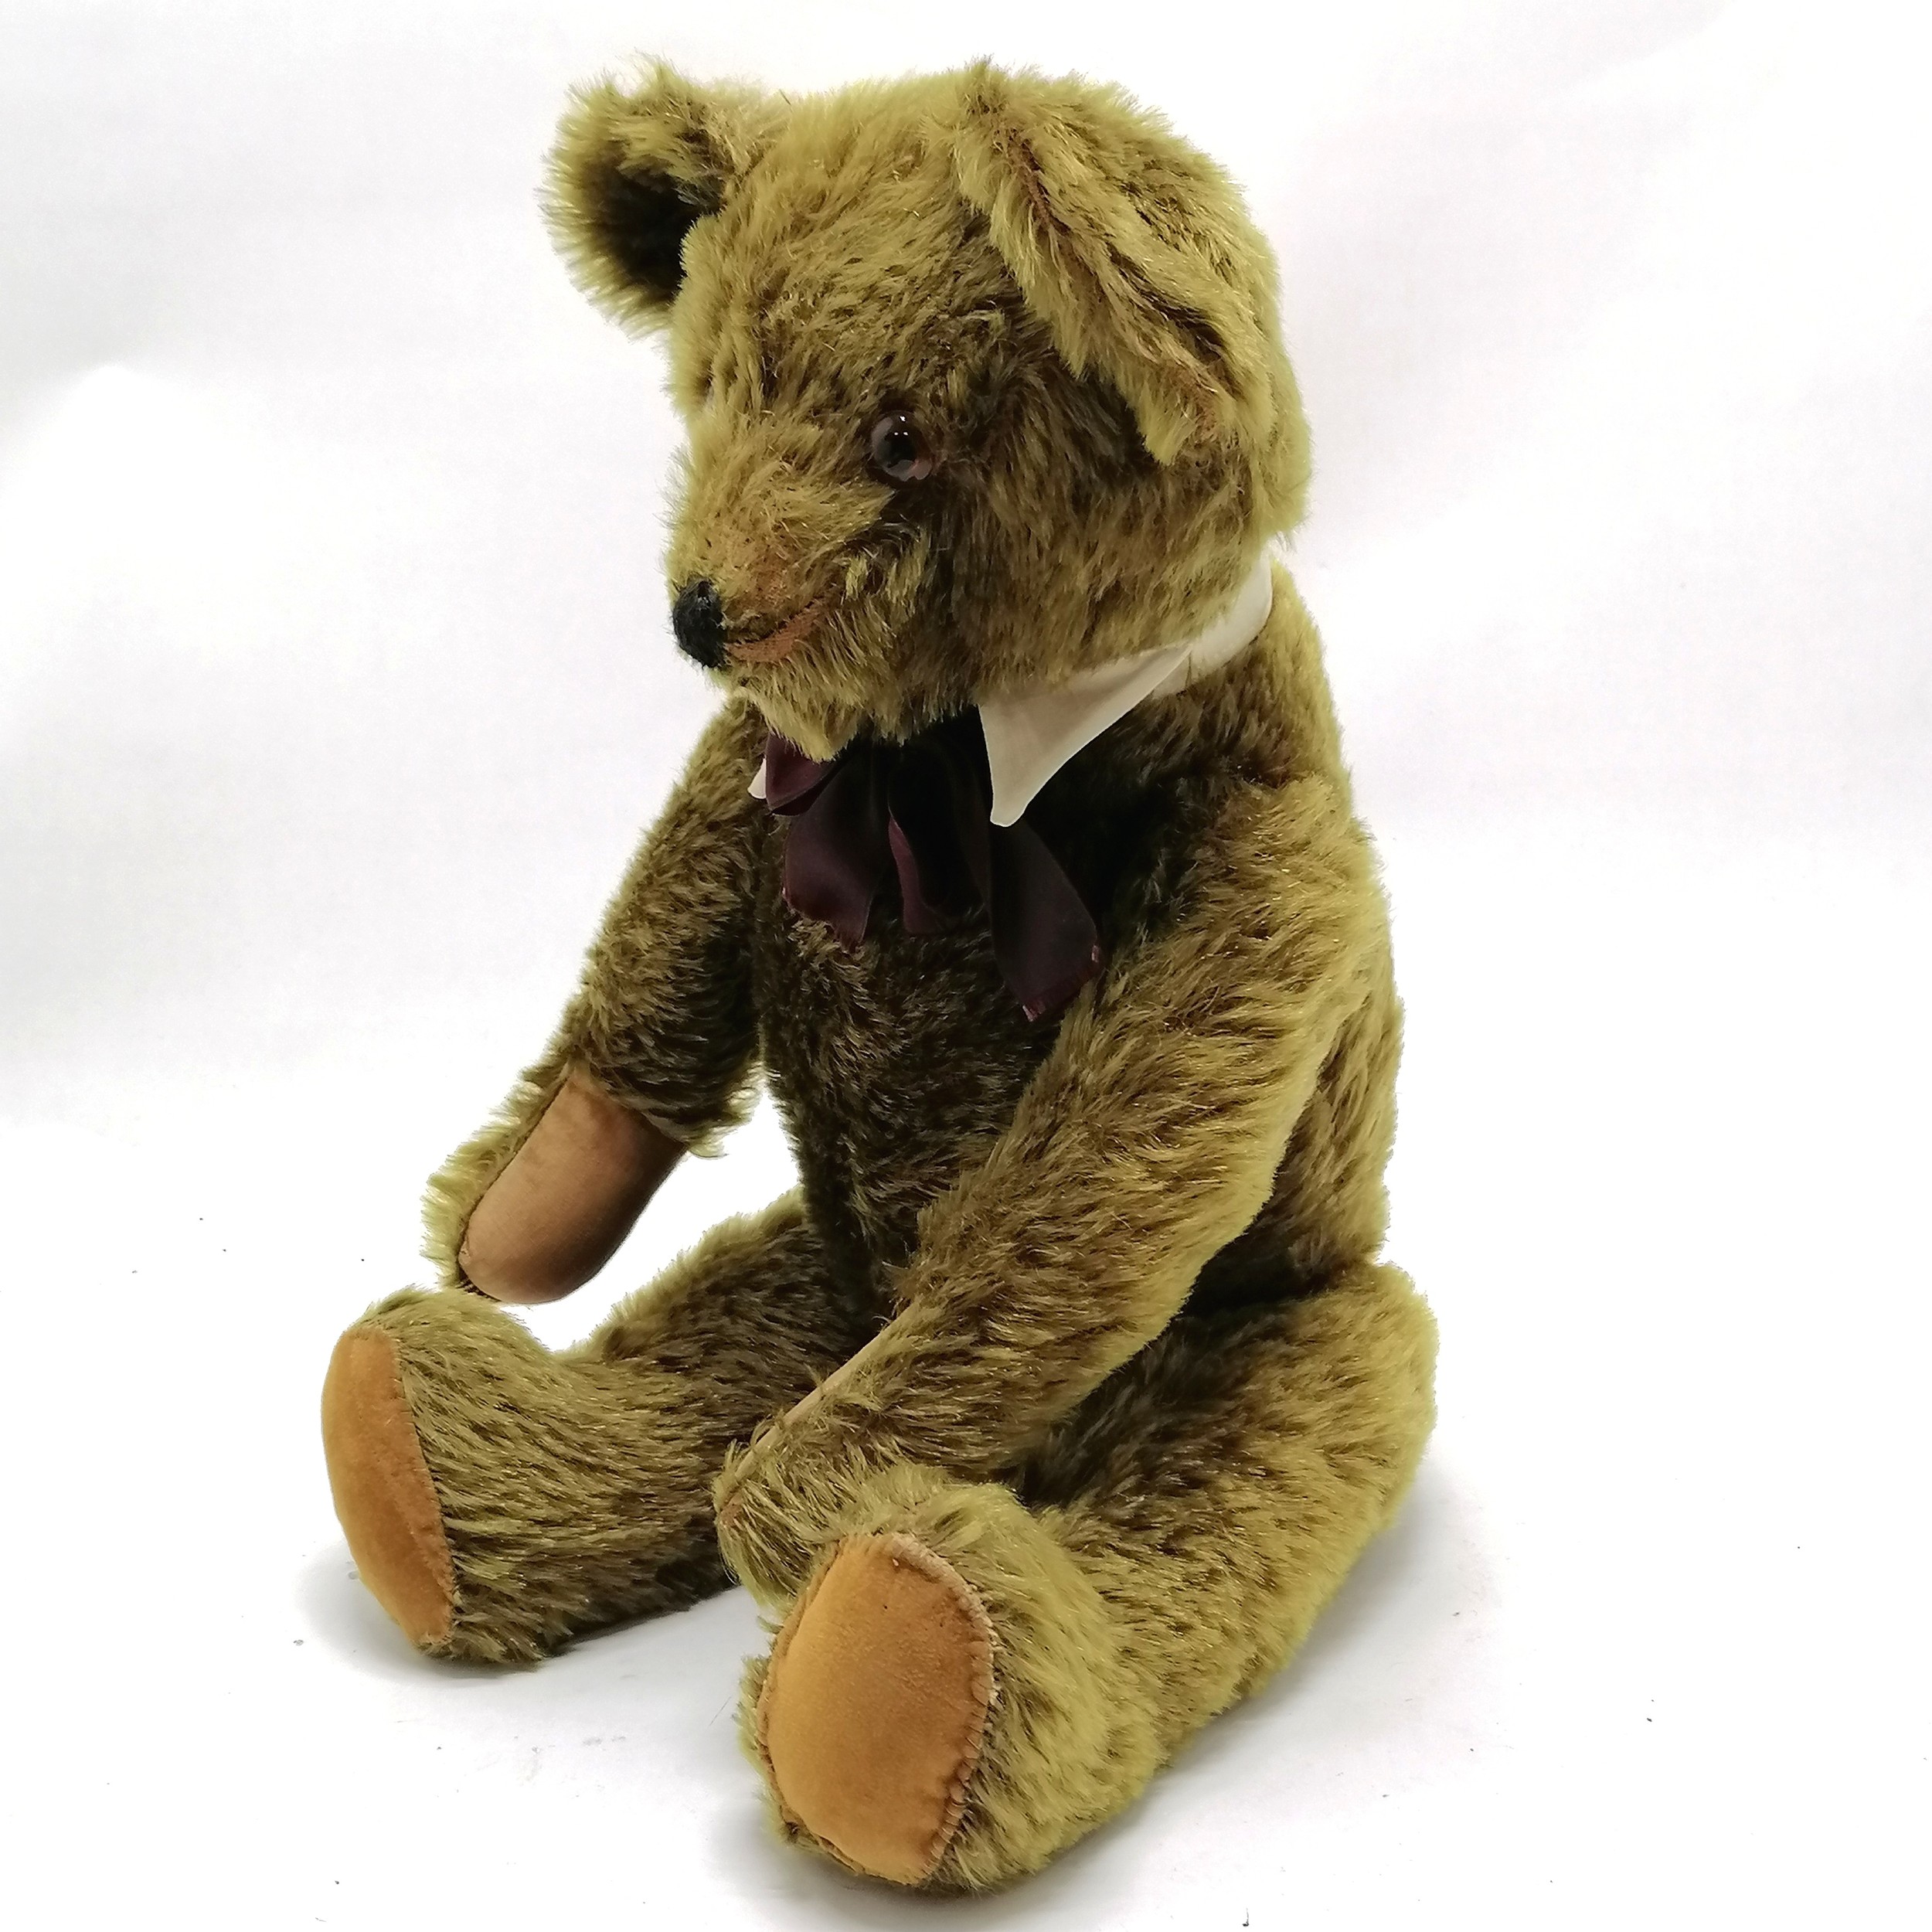 Vintage green mohair jointed Teddy bear 'Knickerbocker' c1940 with glass eyes and stitched nose - Image 5 of 9